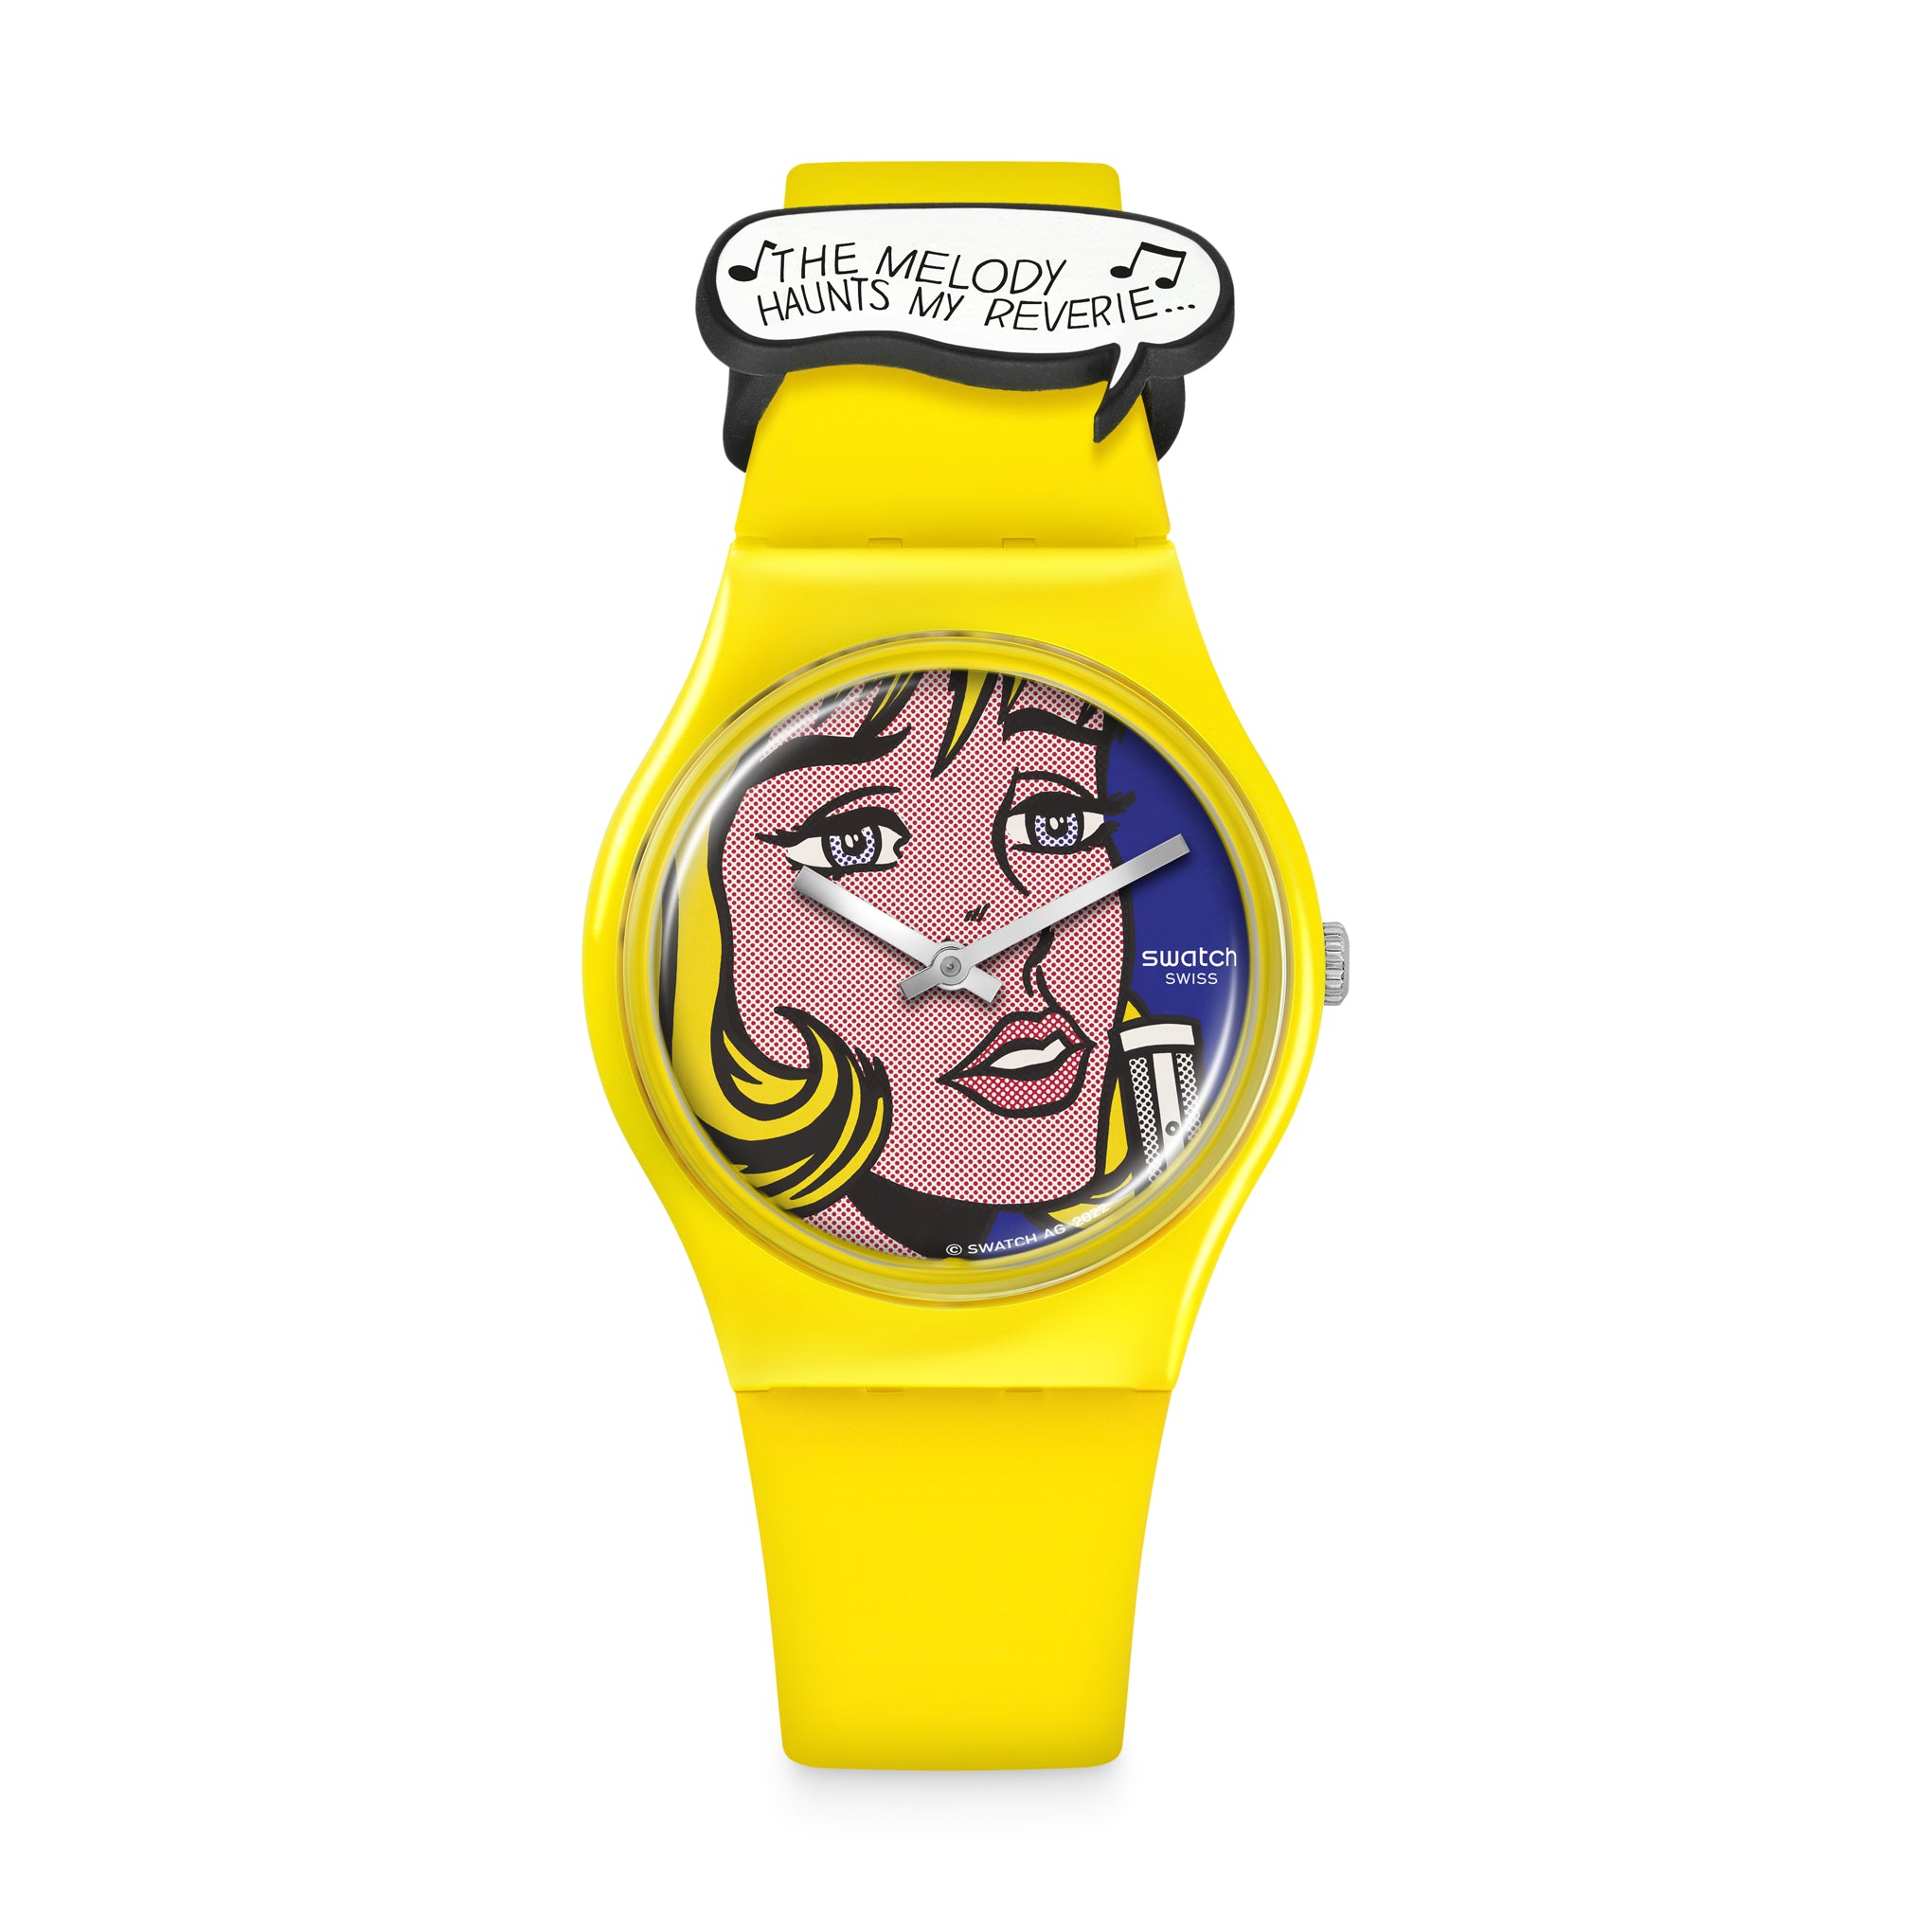 Swatch X MoMA watches